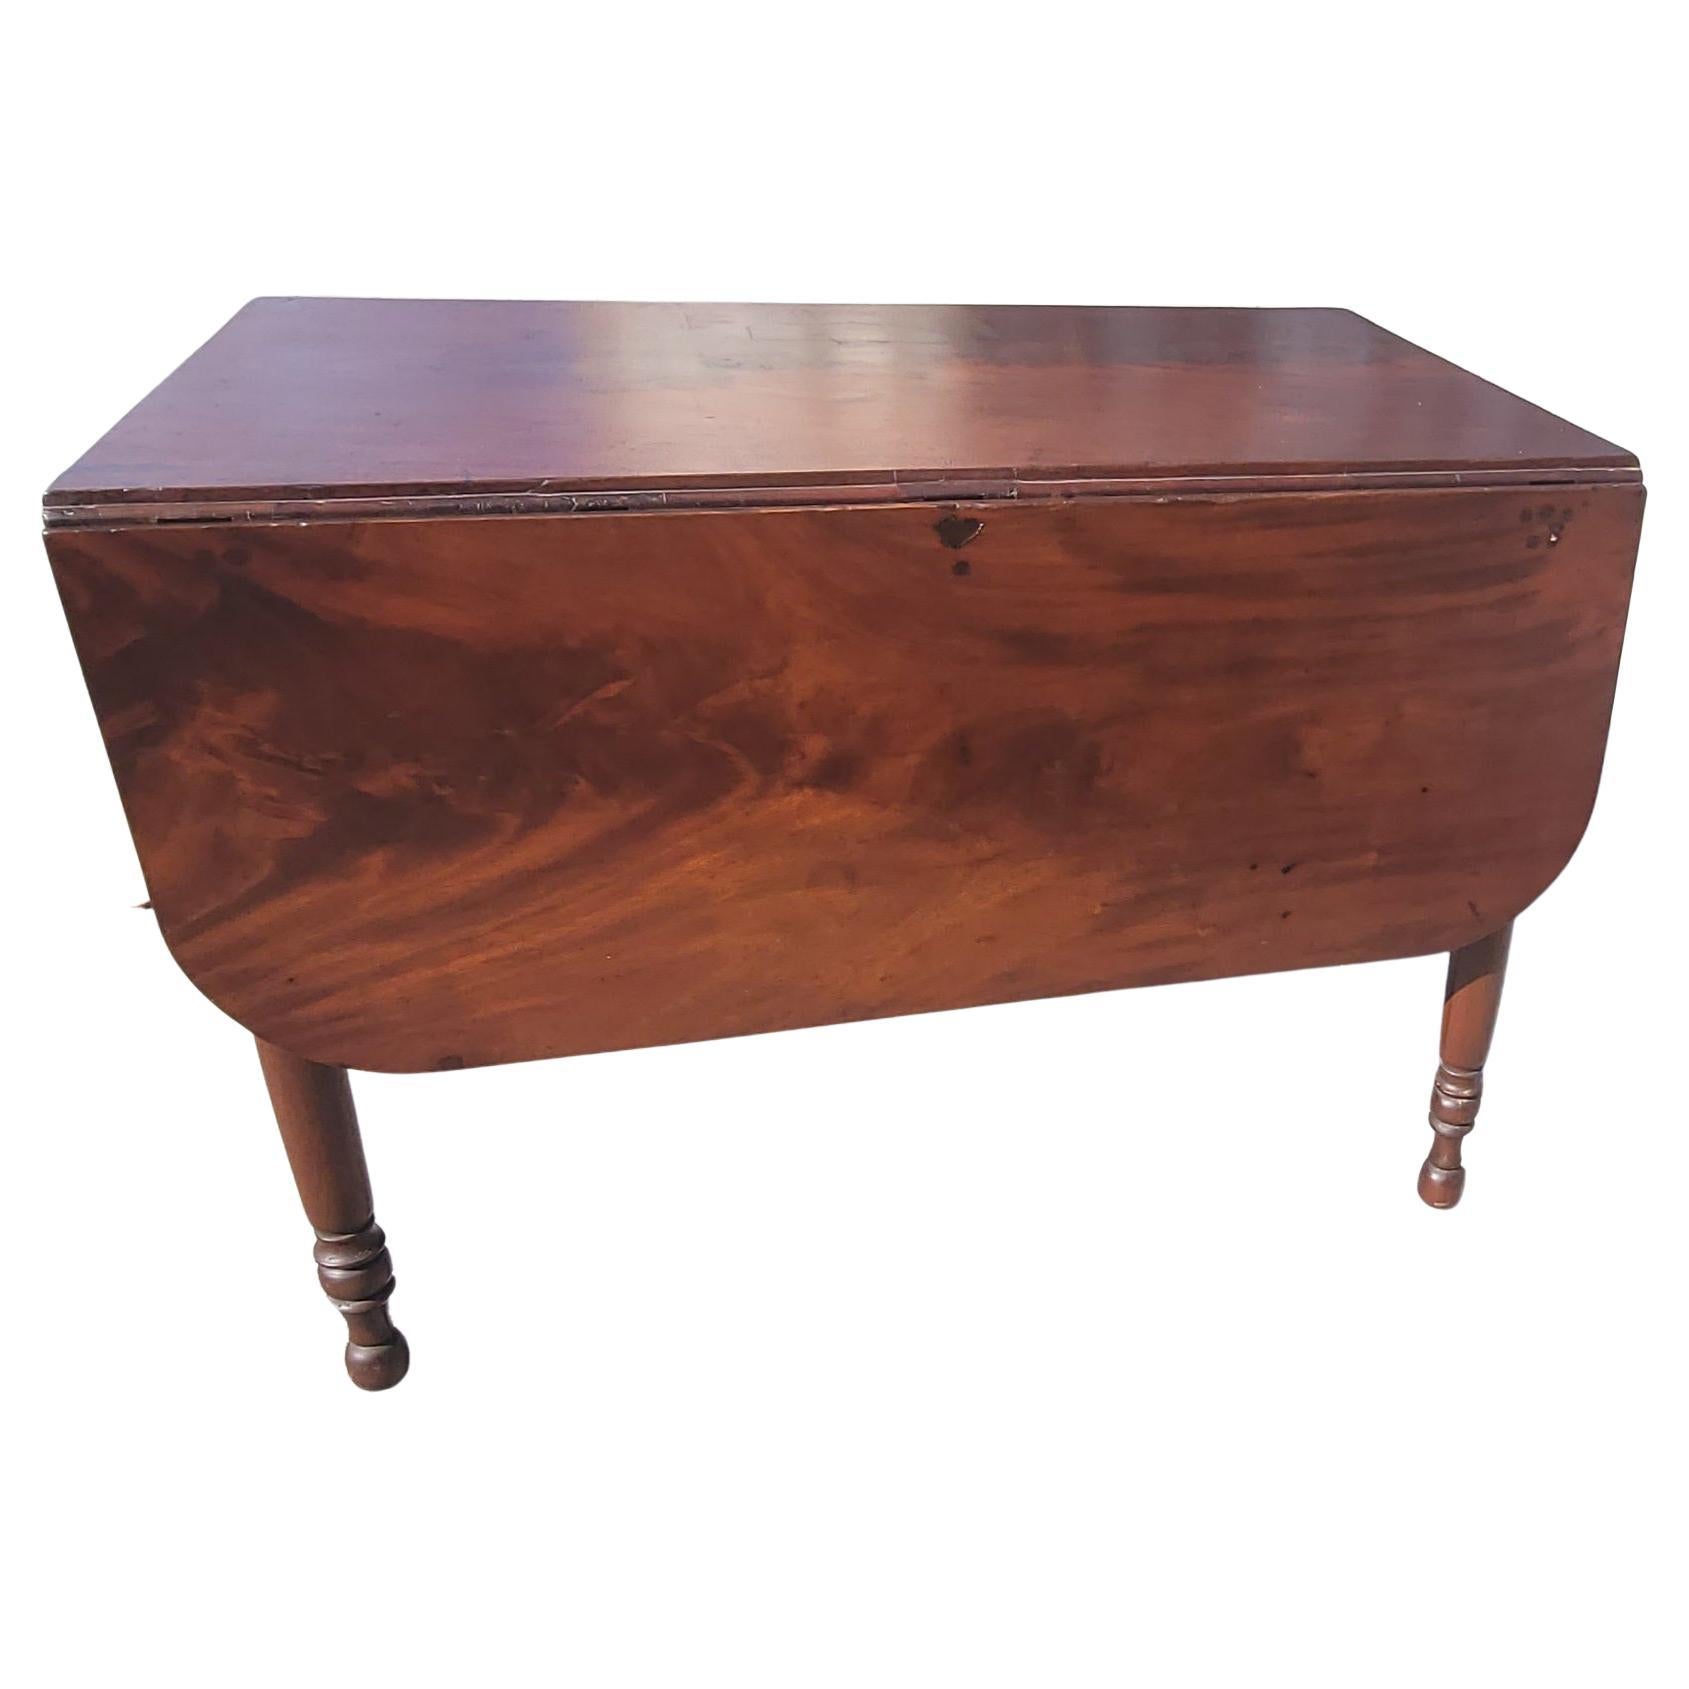 19th Century American Empire Federal Flame Mahogany Drop-Leaf Dining Table In Good Condition For Sale In Germantown, MD